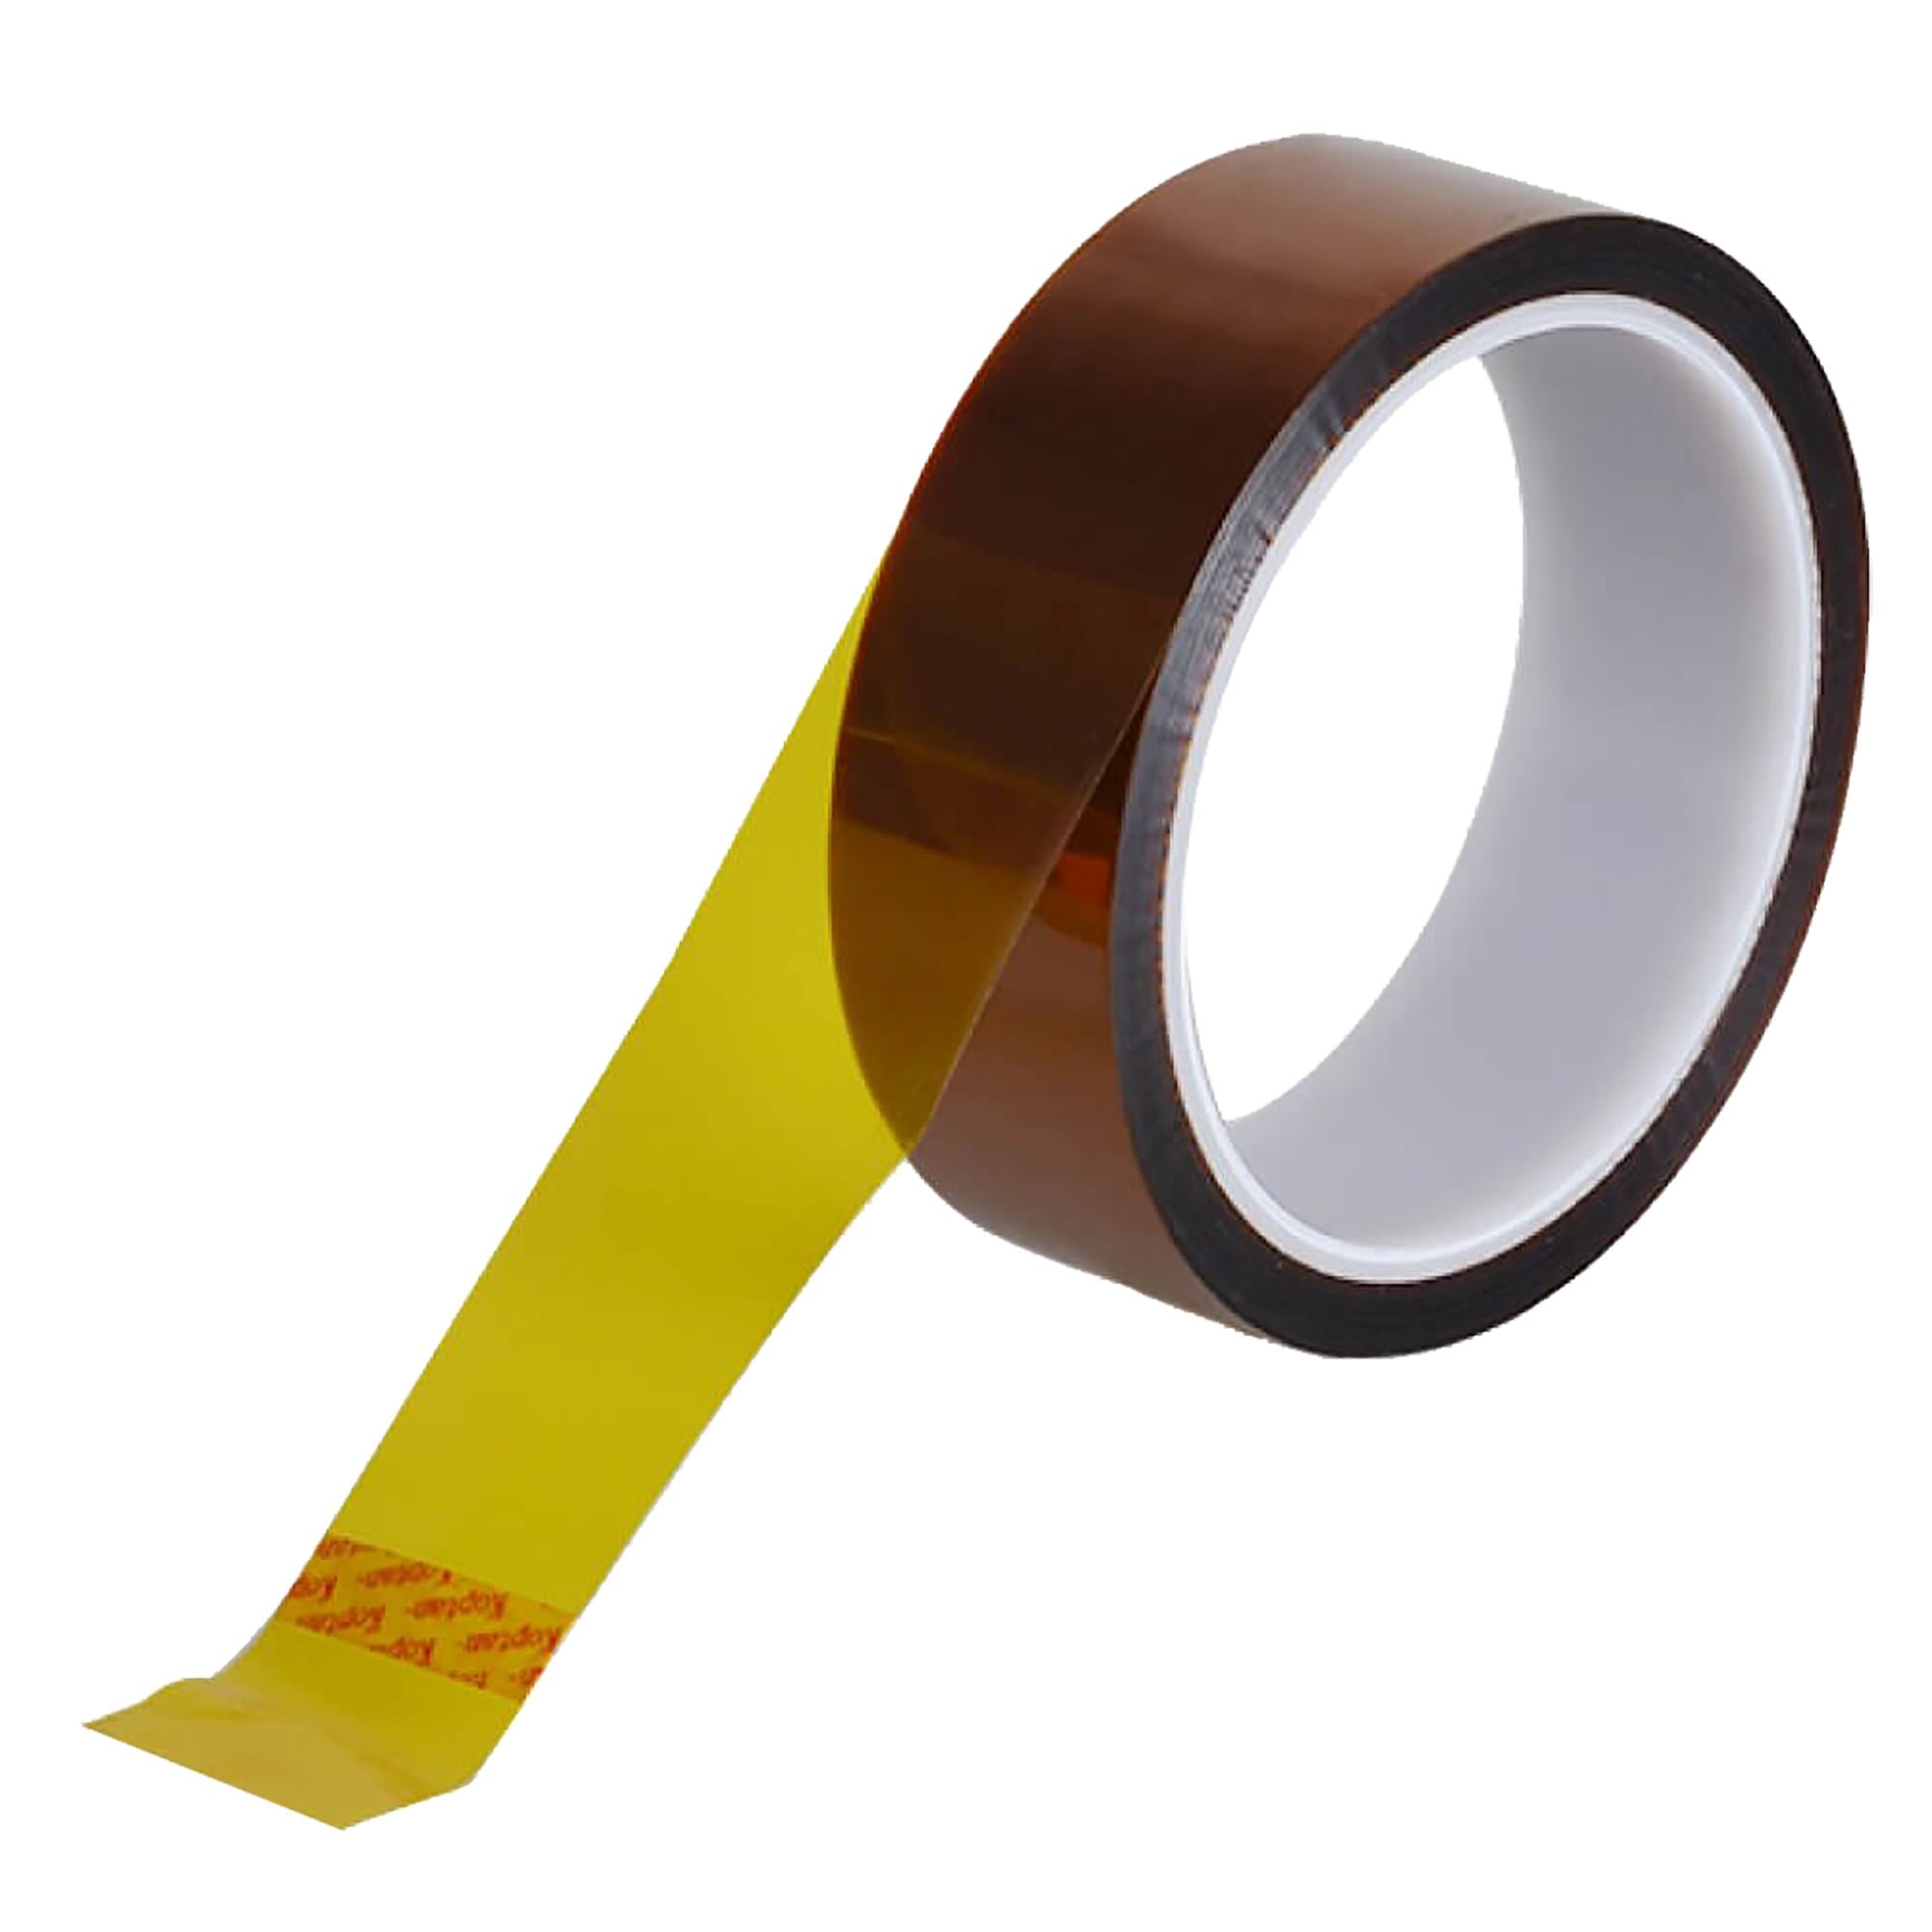 4 Rolls Heat Tape High Temperature 6mmx33m Sublimation Tape Yellow - 6mm -  Bed Bath & Beyond - 38196938